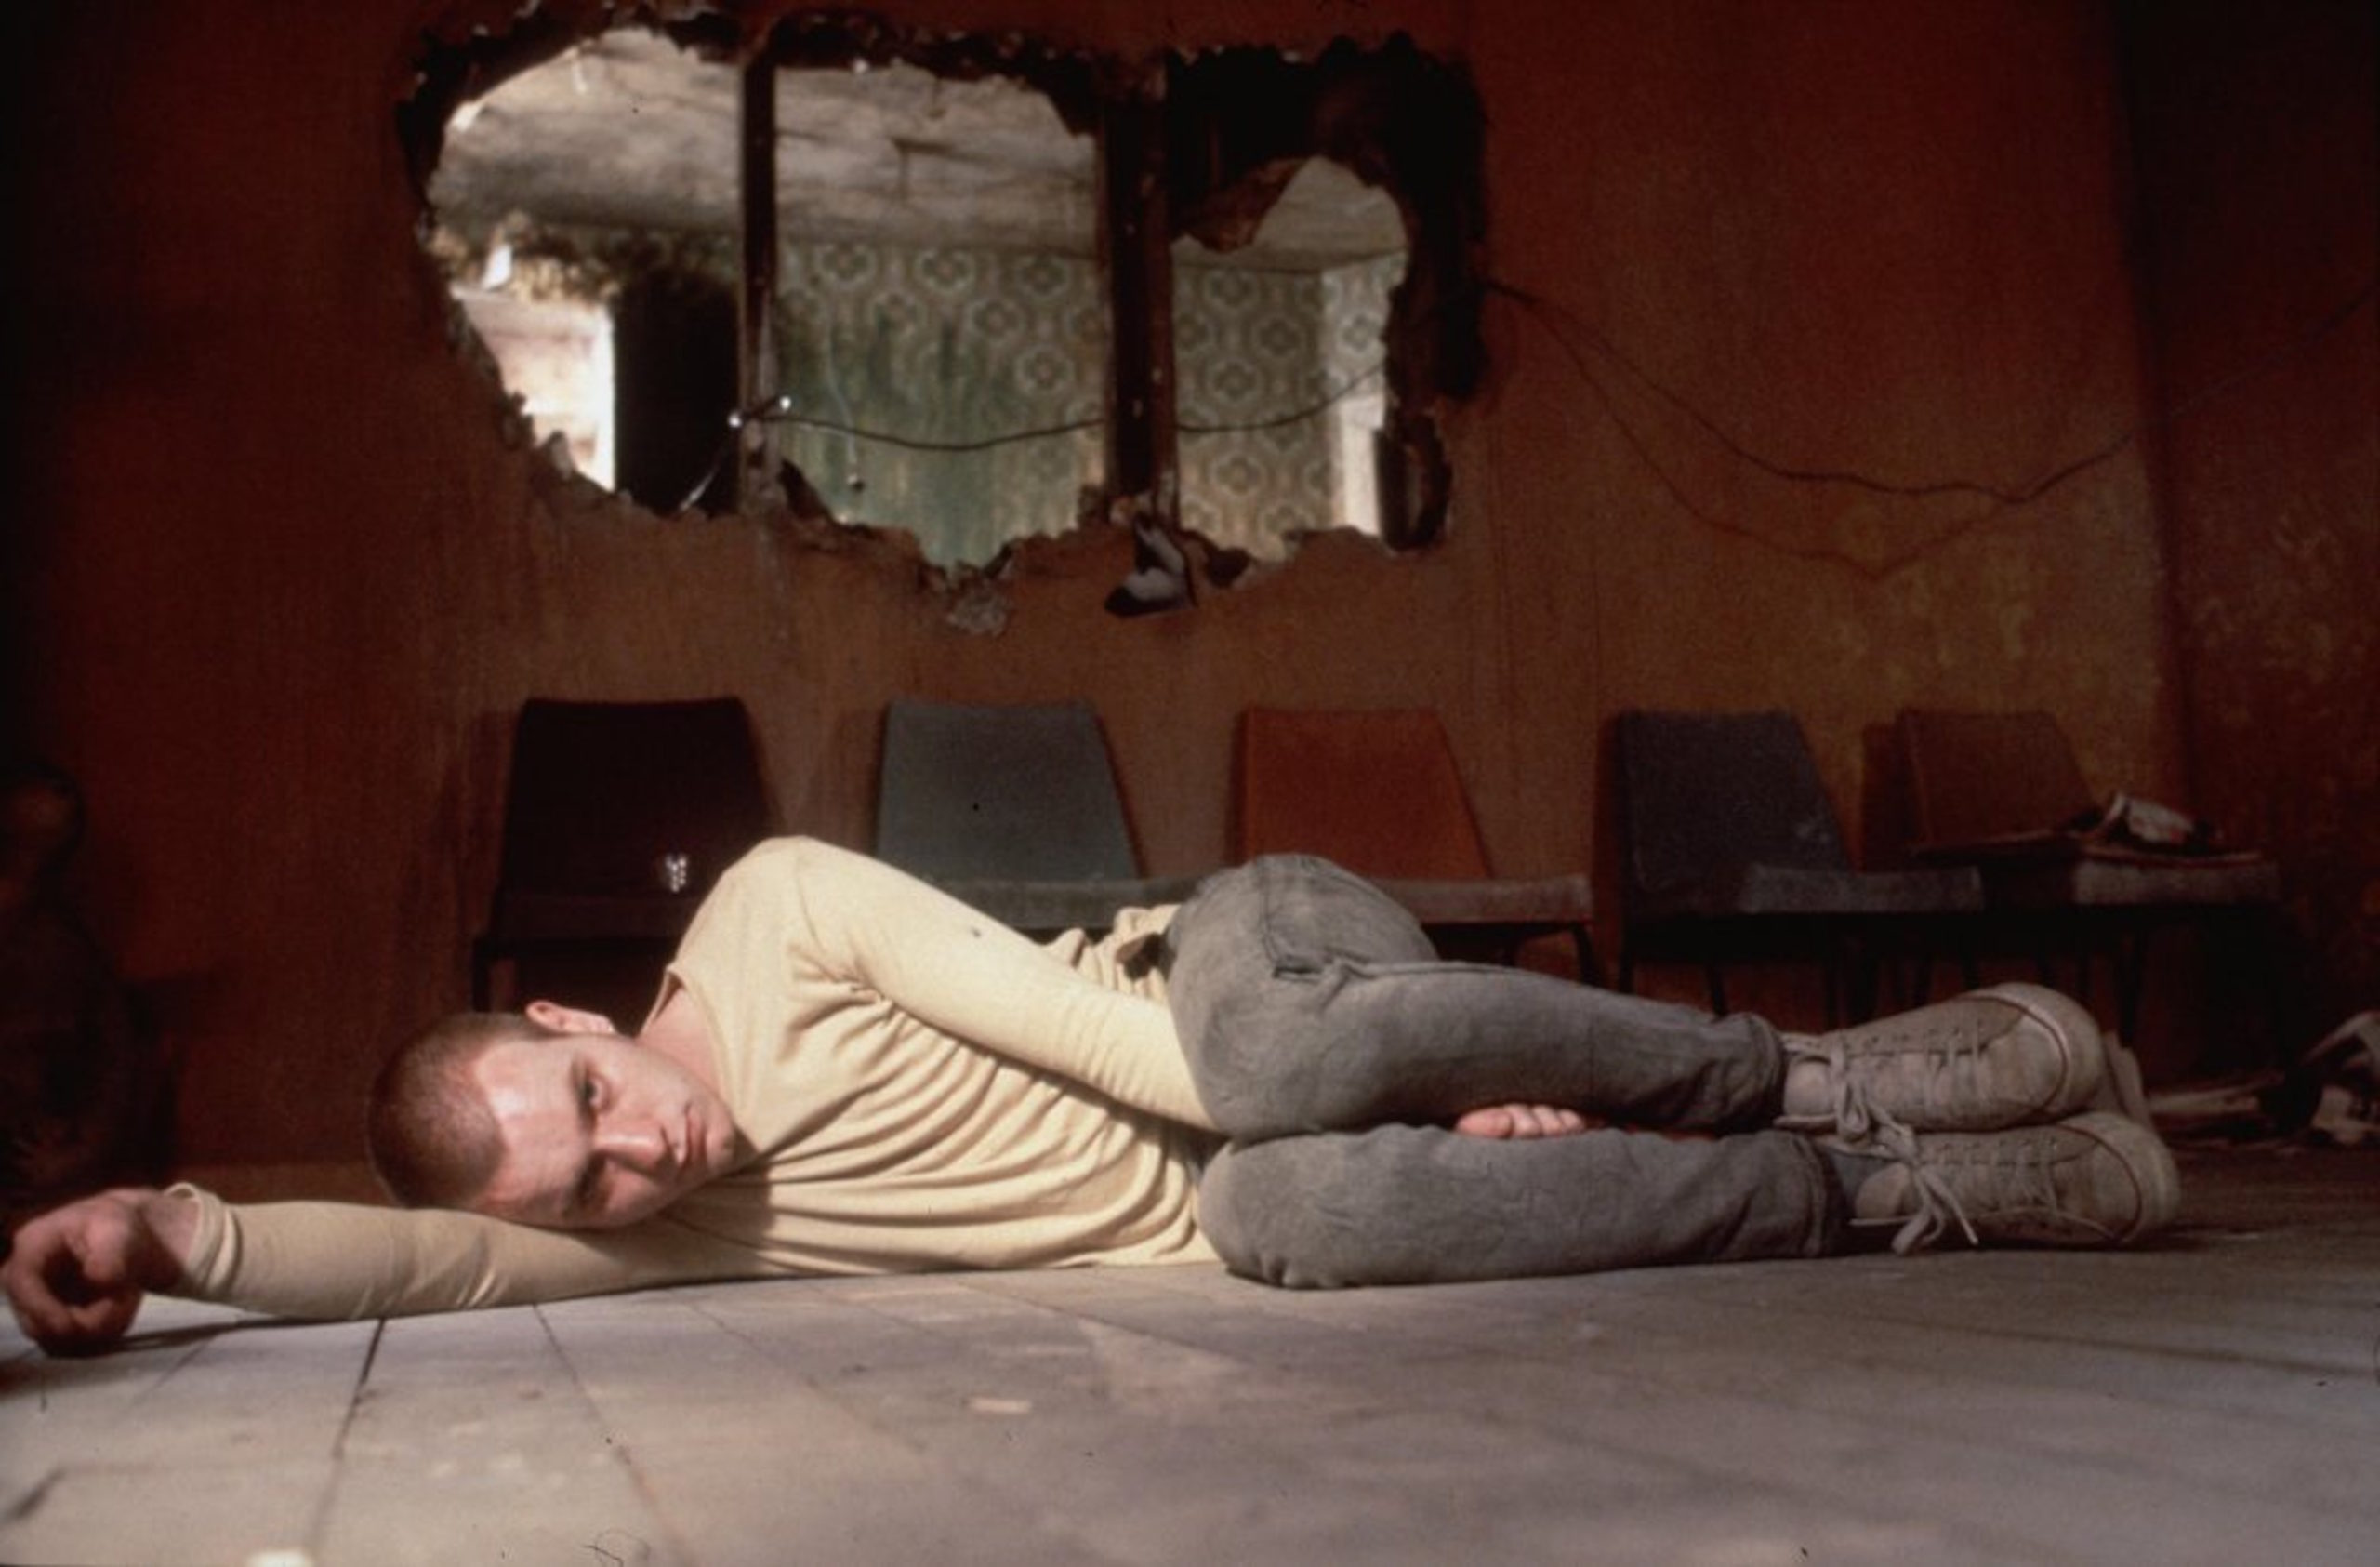 Ewan McGregor's character, Renton, lying on the floor curled up. He's in a decaying abandoned building.